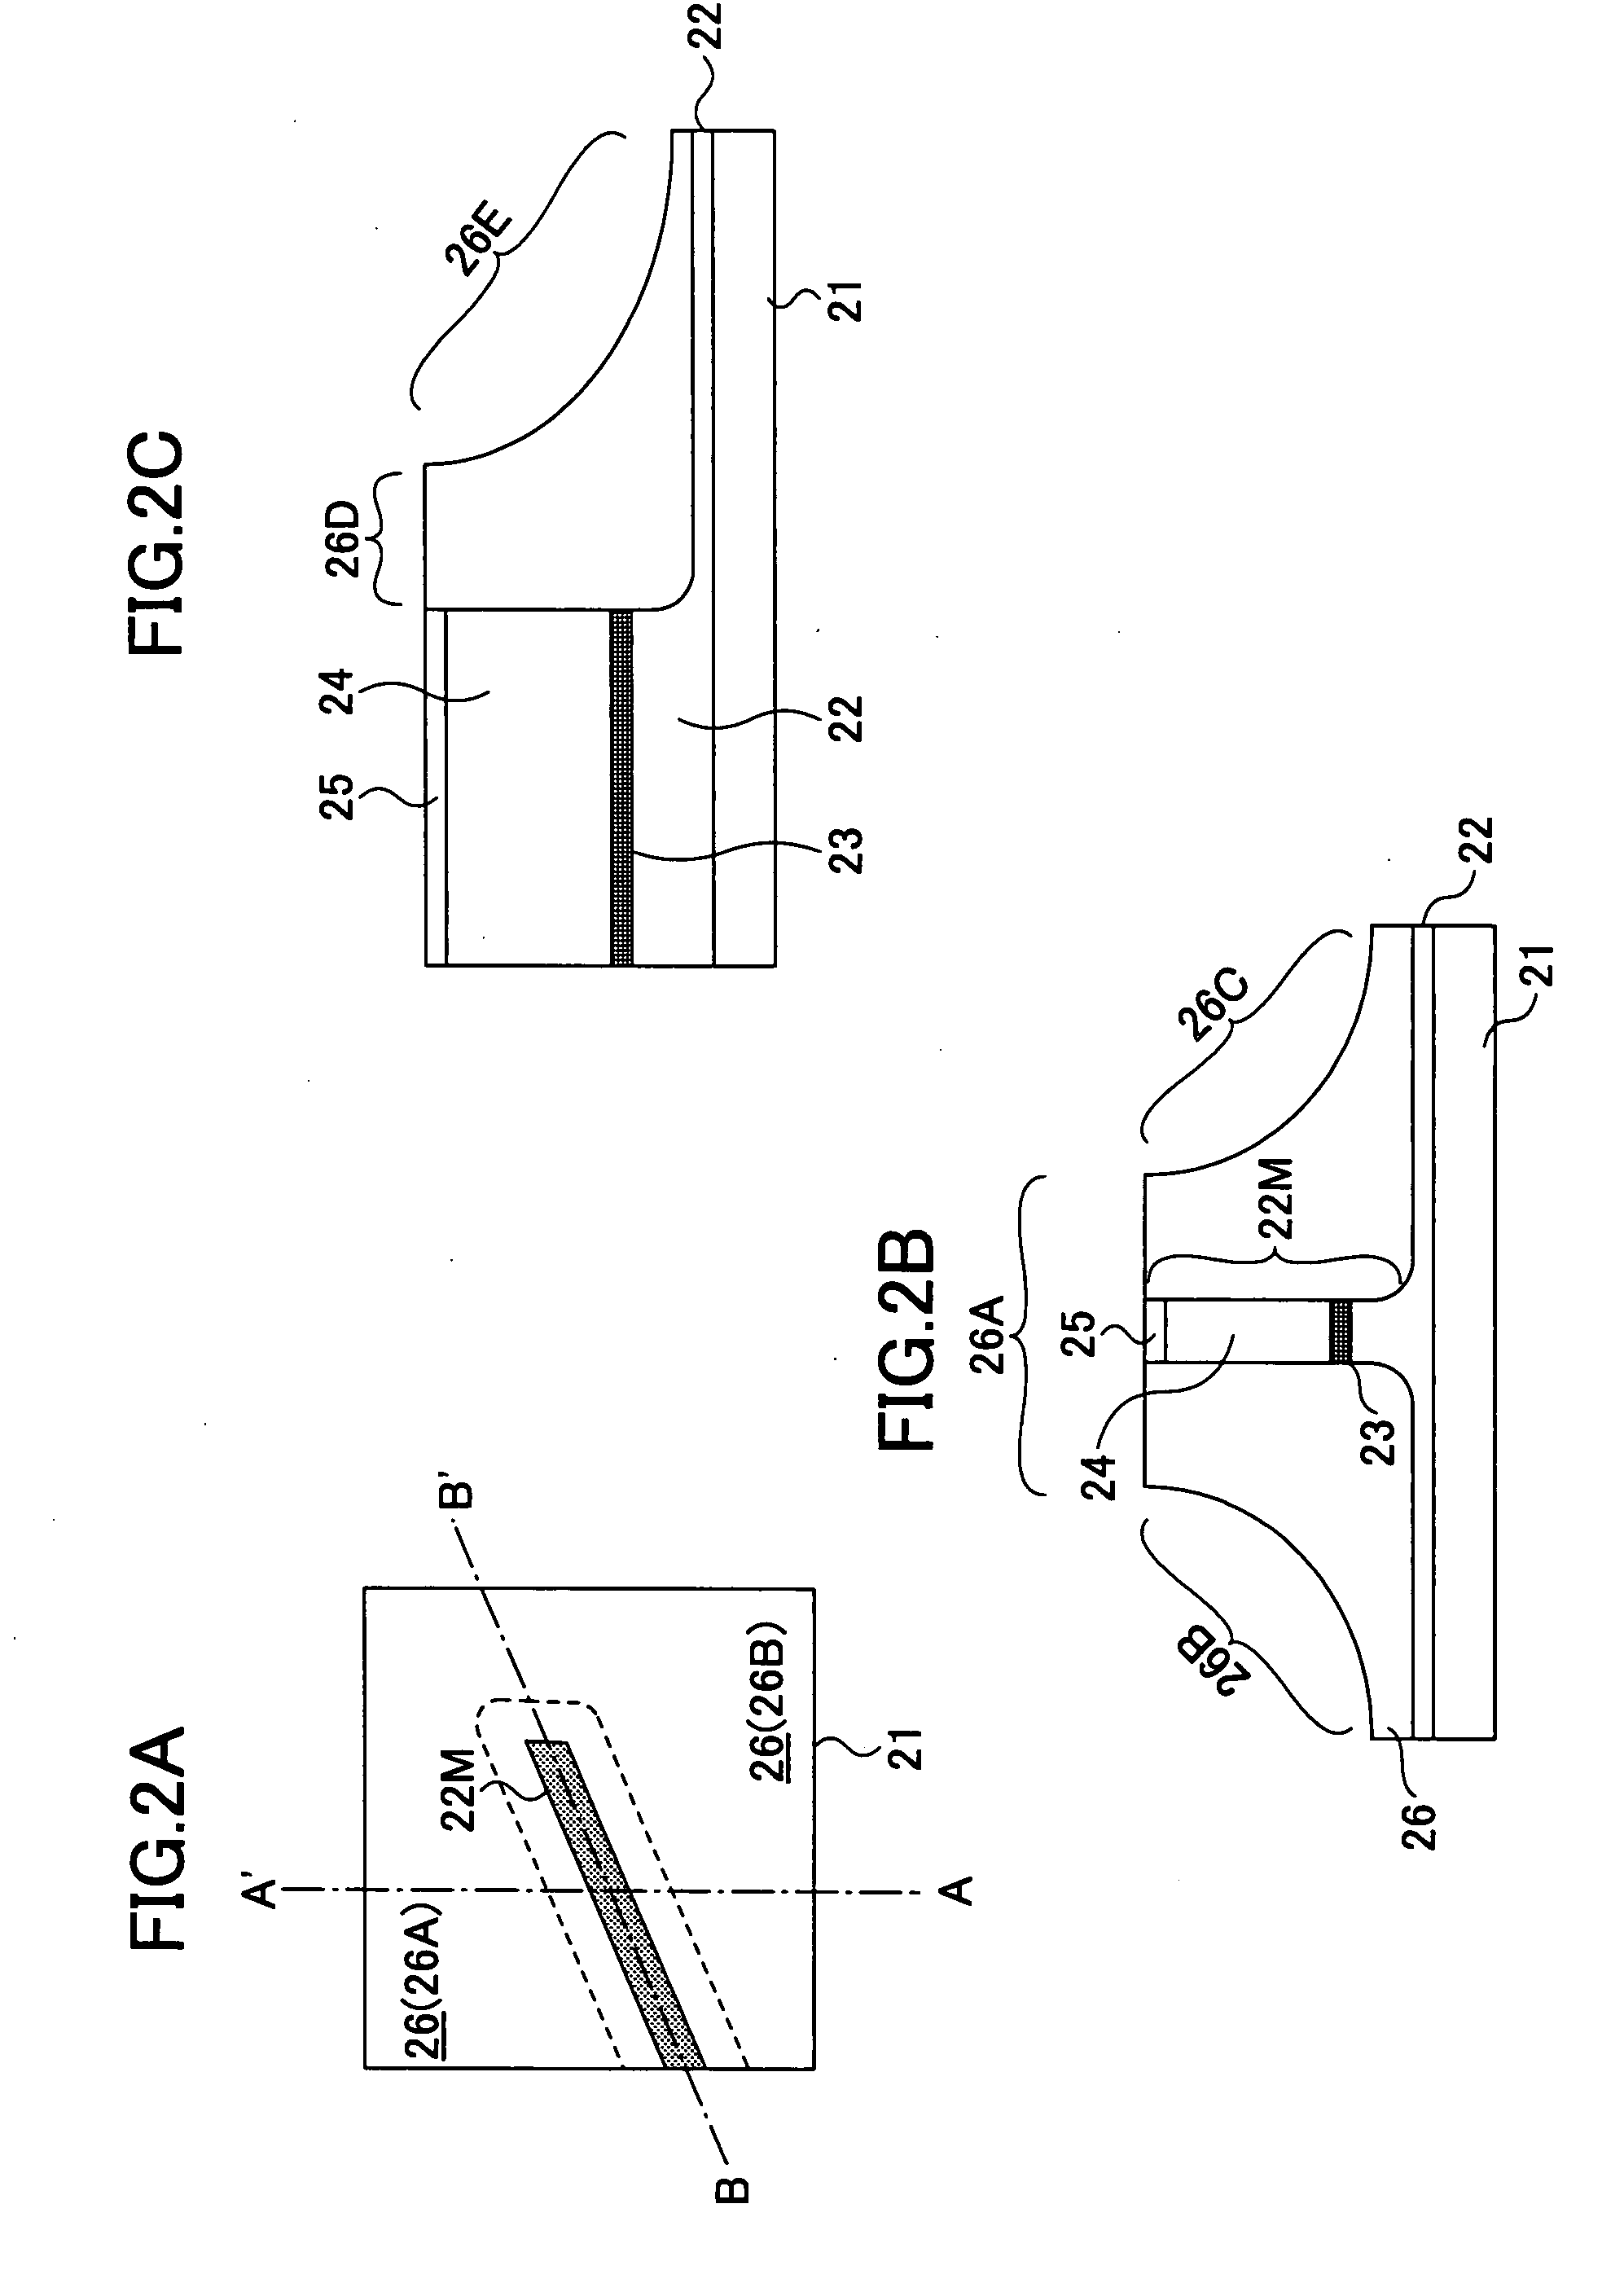 Optical semiconductor device and fabrication process thereof